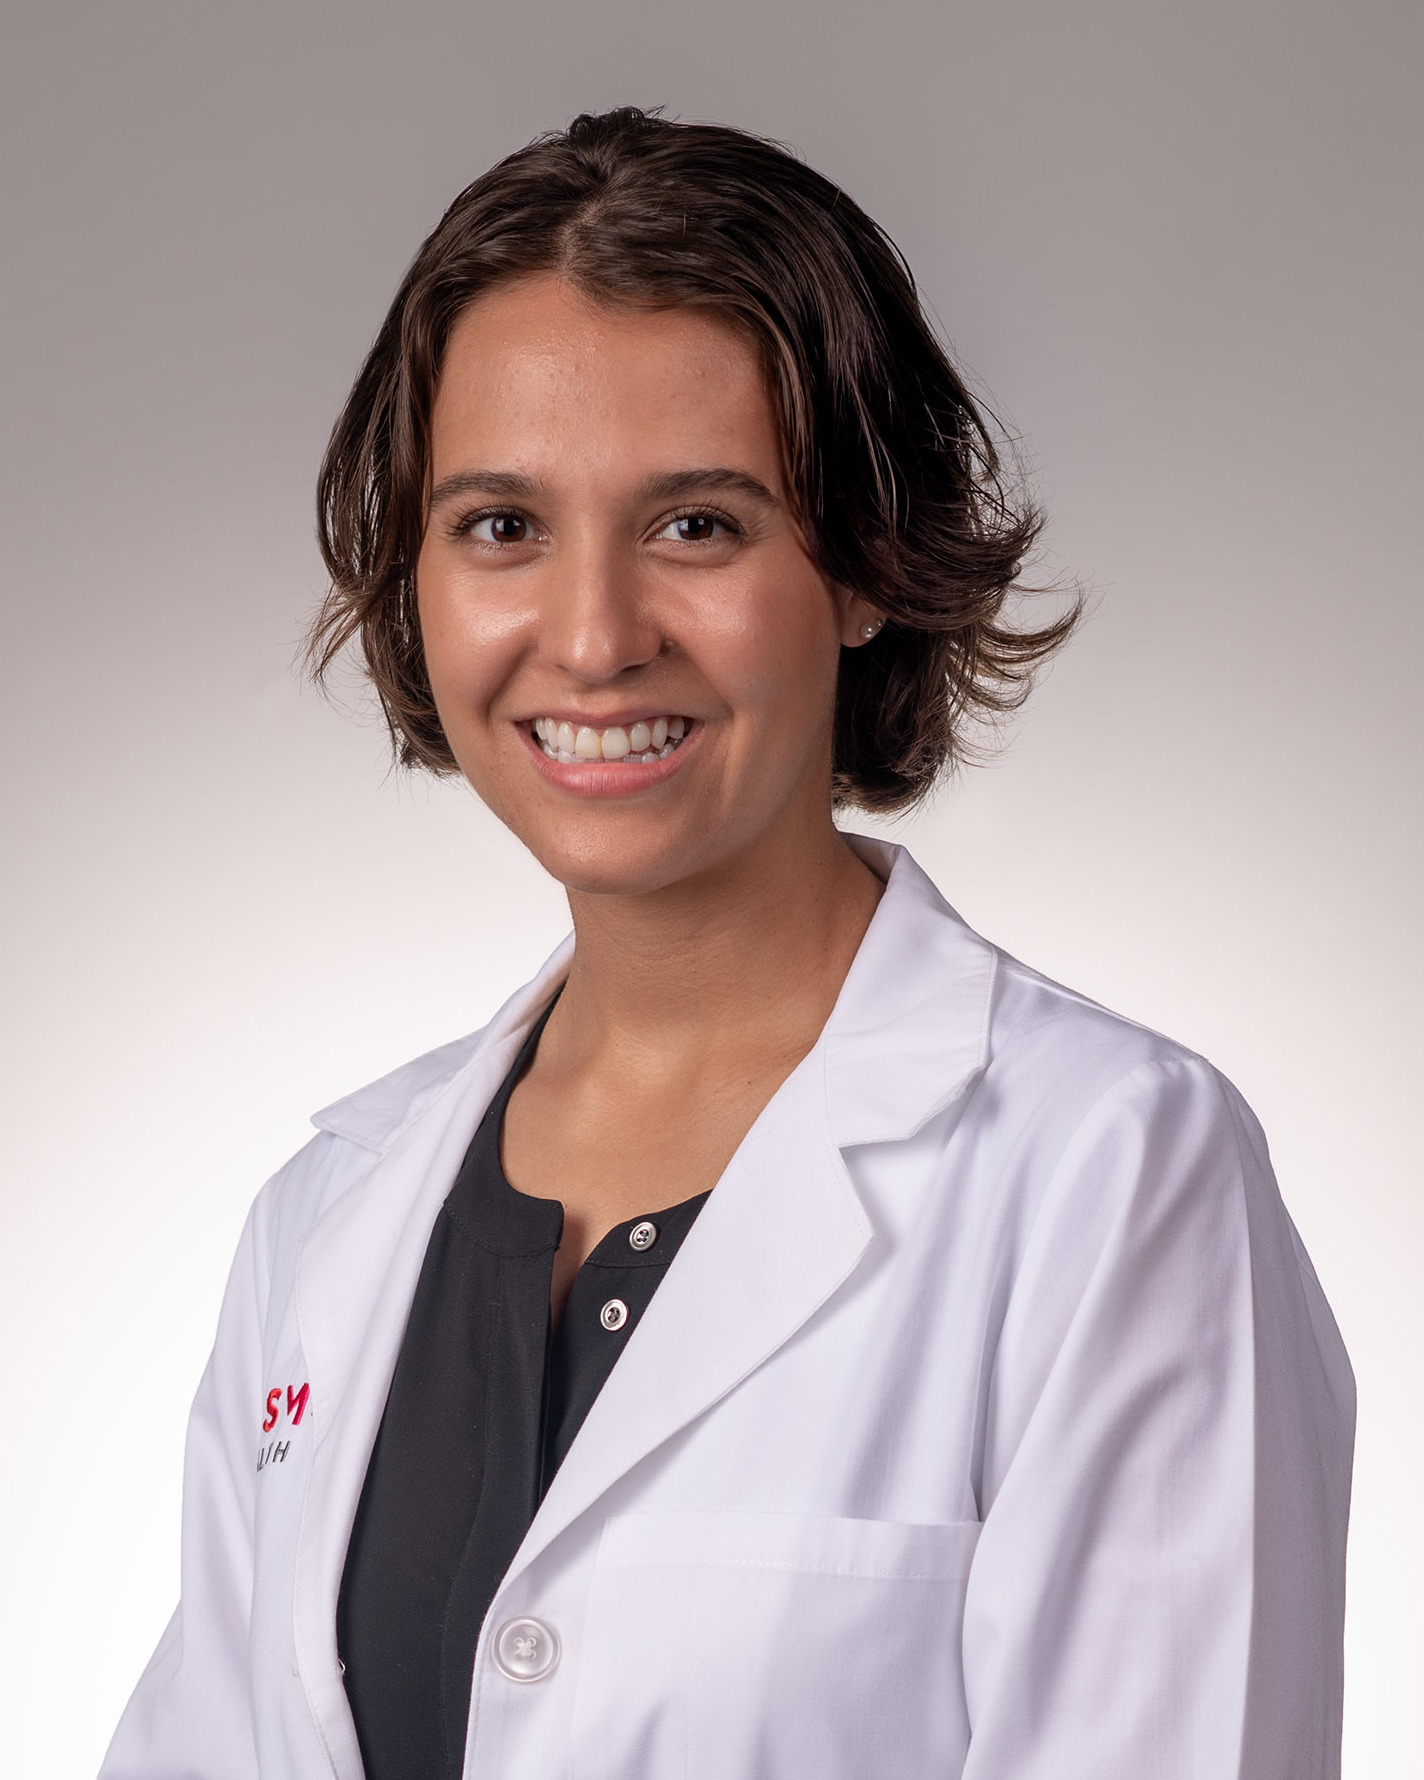 Jessica Obeysekare, M.D.